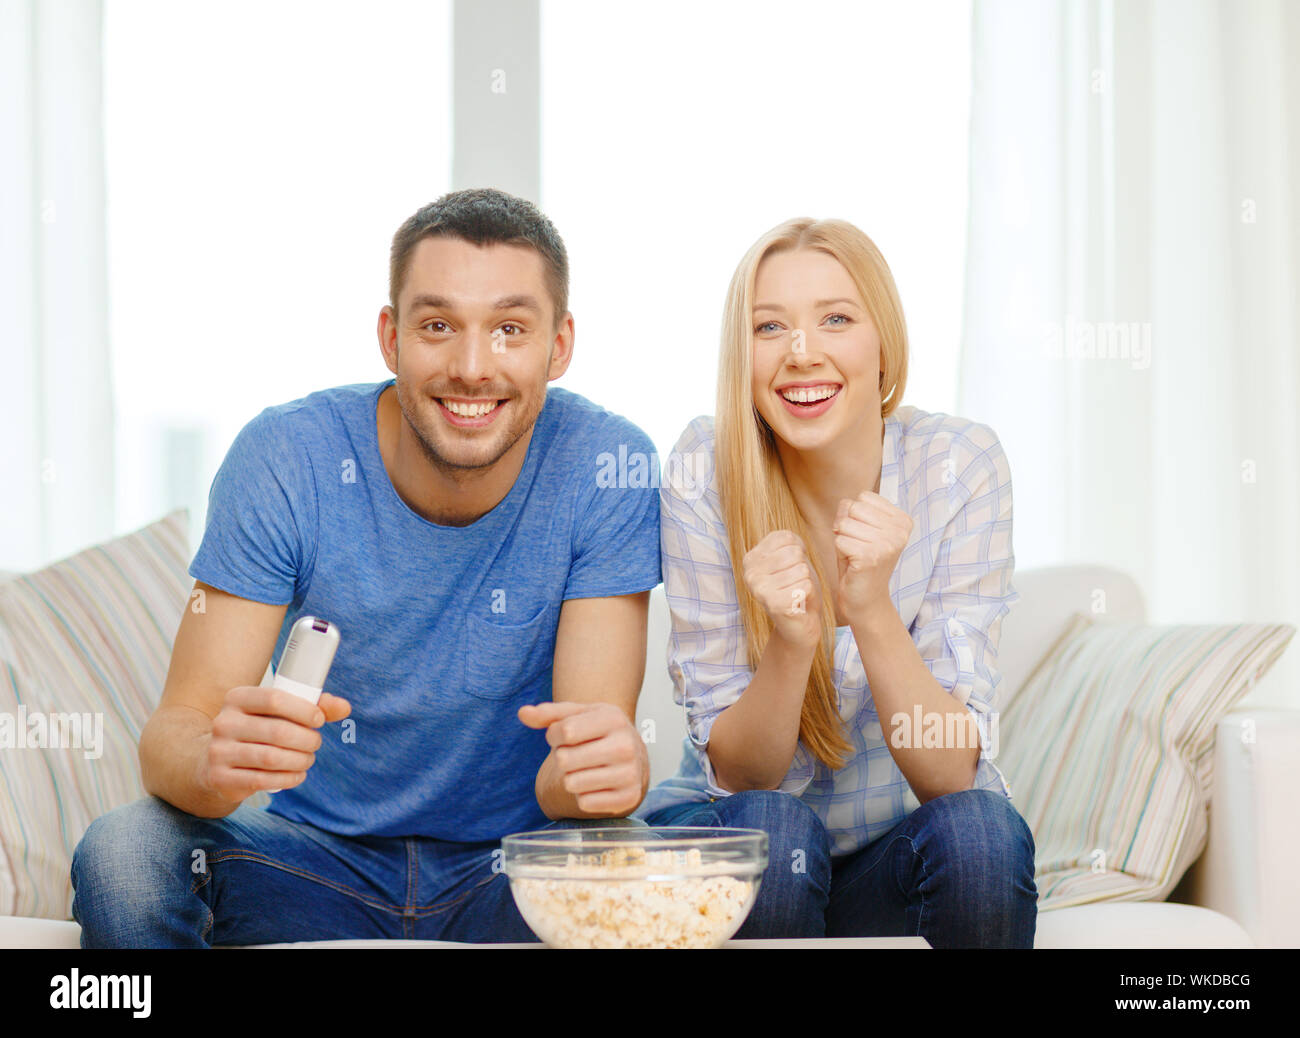 food, love, family, sports, entretainment and happiness concept - smiling couple with popcorn cheering sports team at home Stock Photo